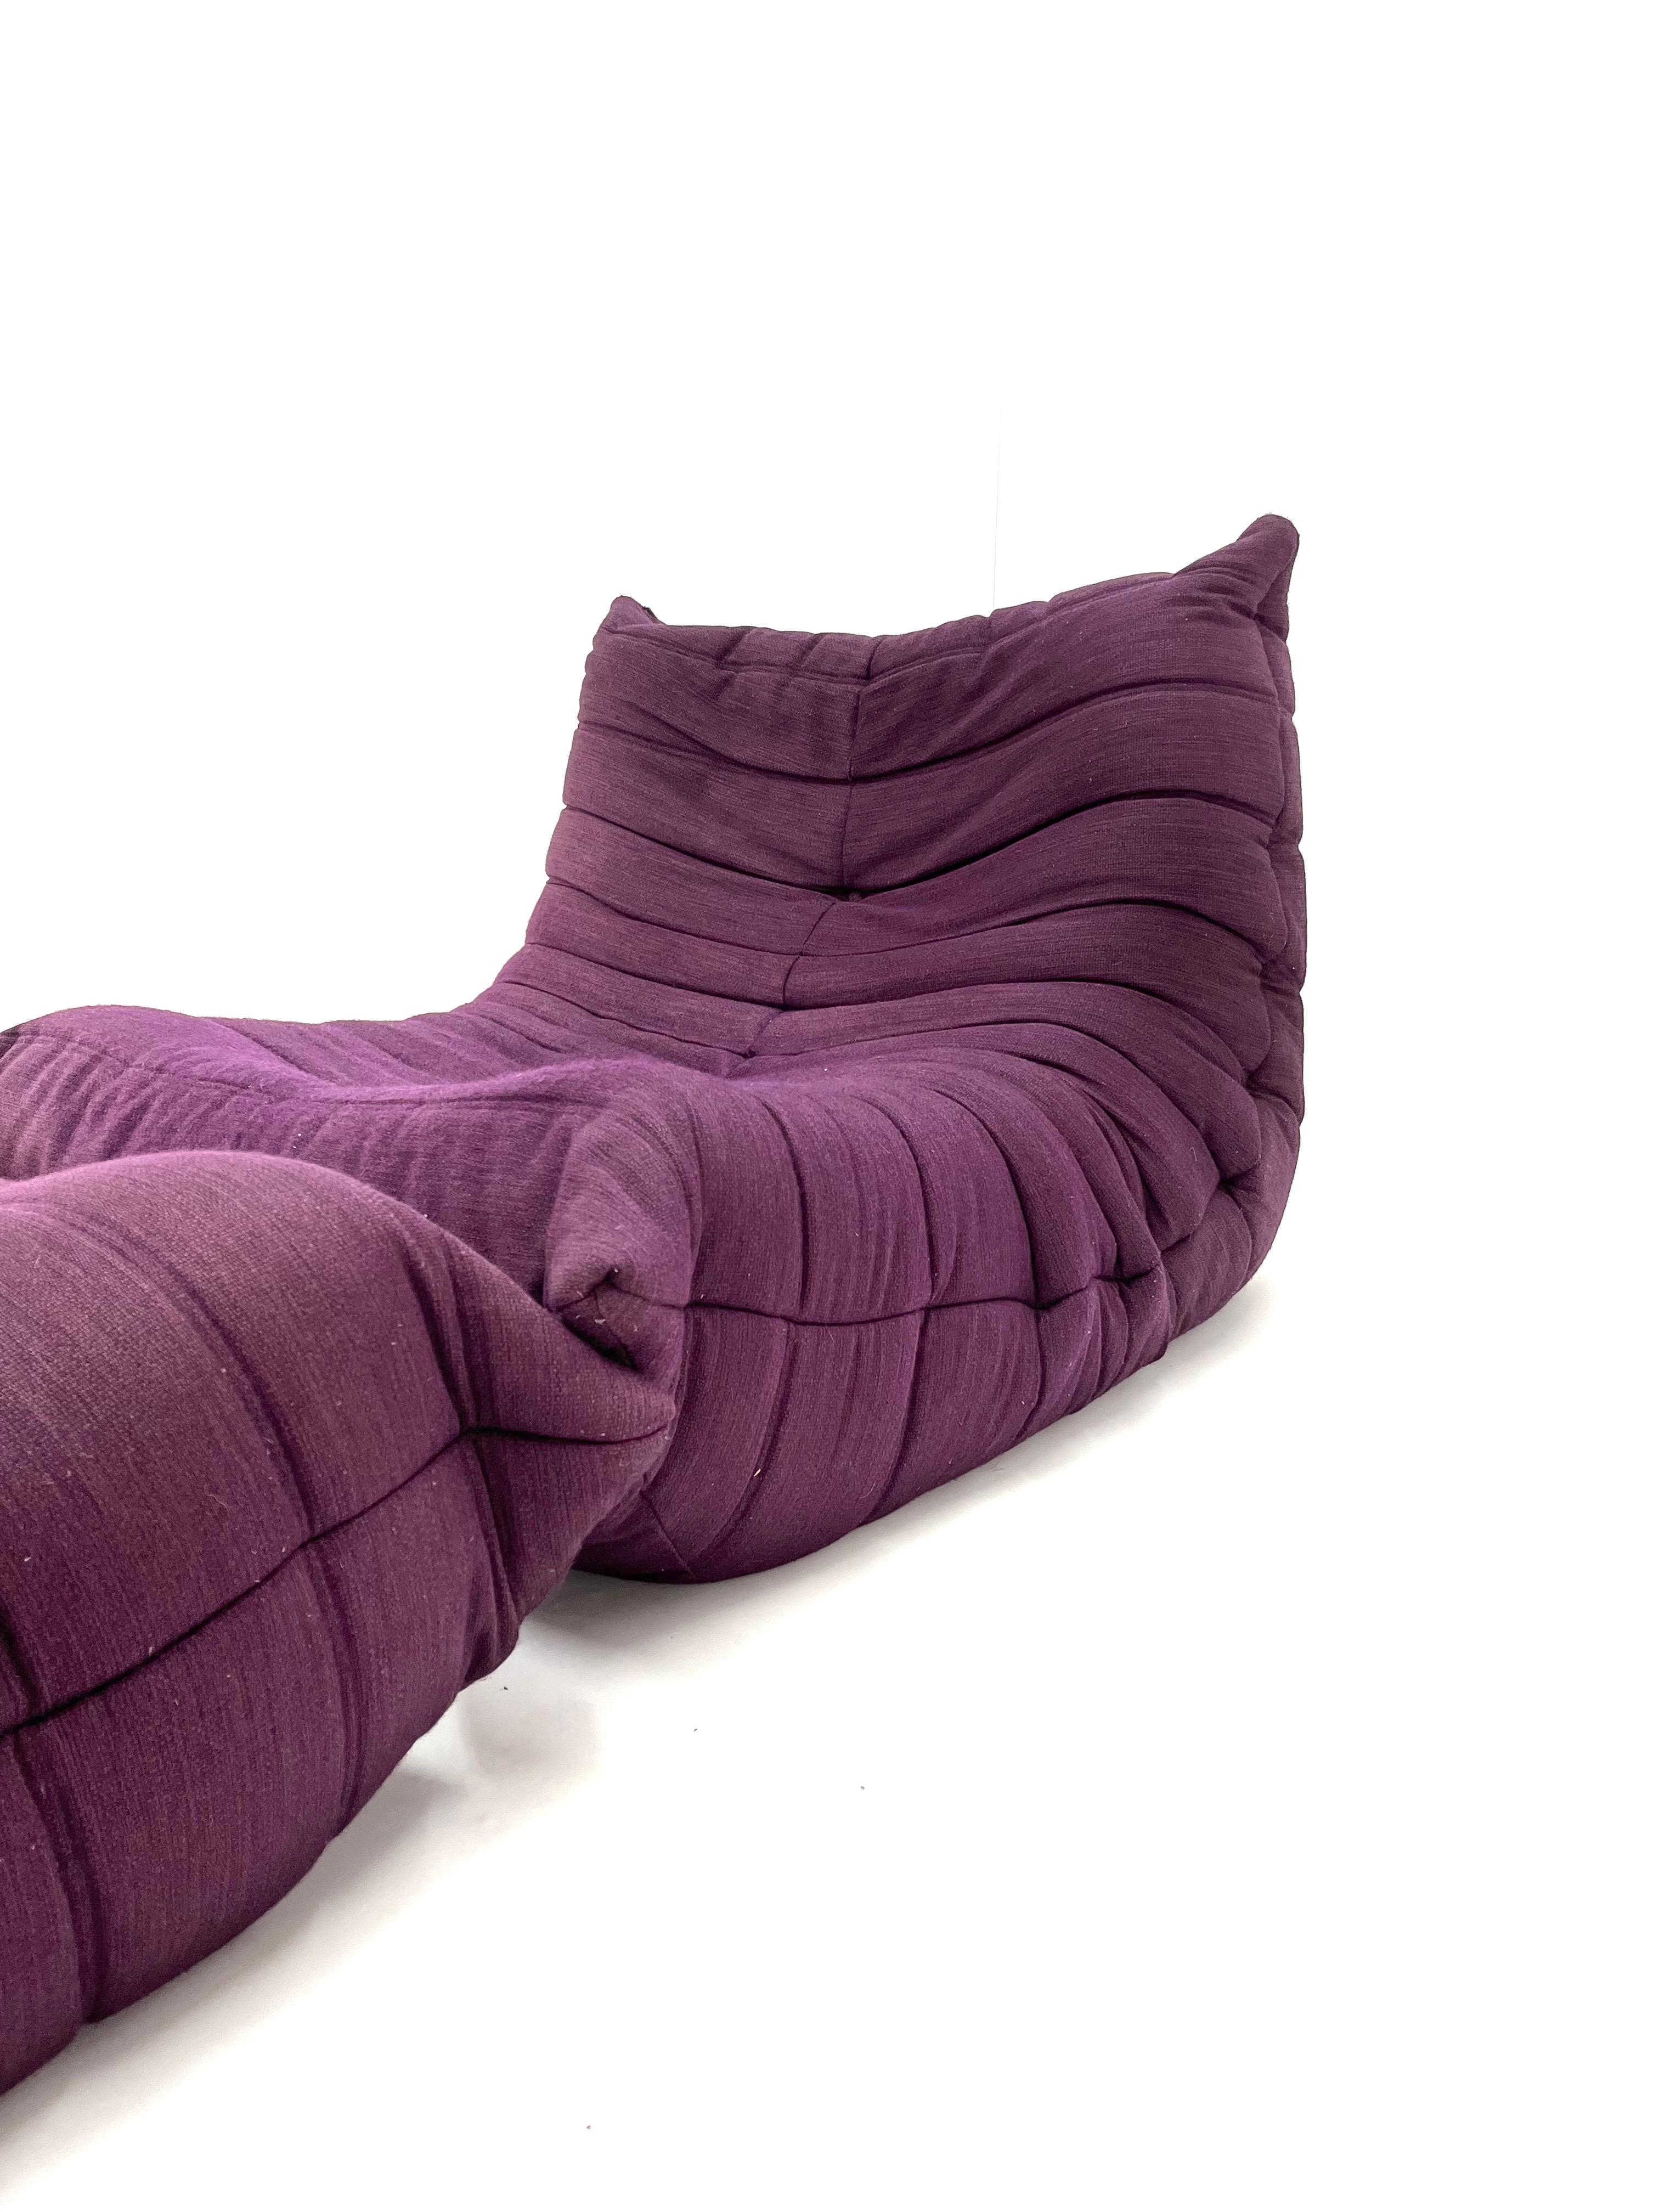 Togo Chair and Ottoman in Purple by Michel Ducaroy for Ligne Roset For Sale 1